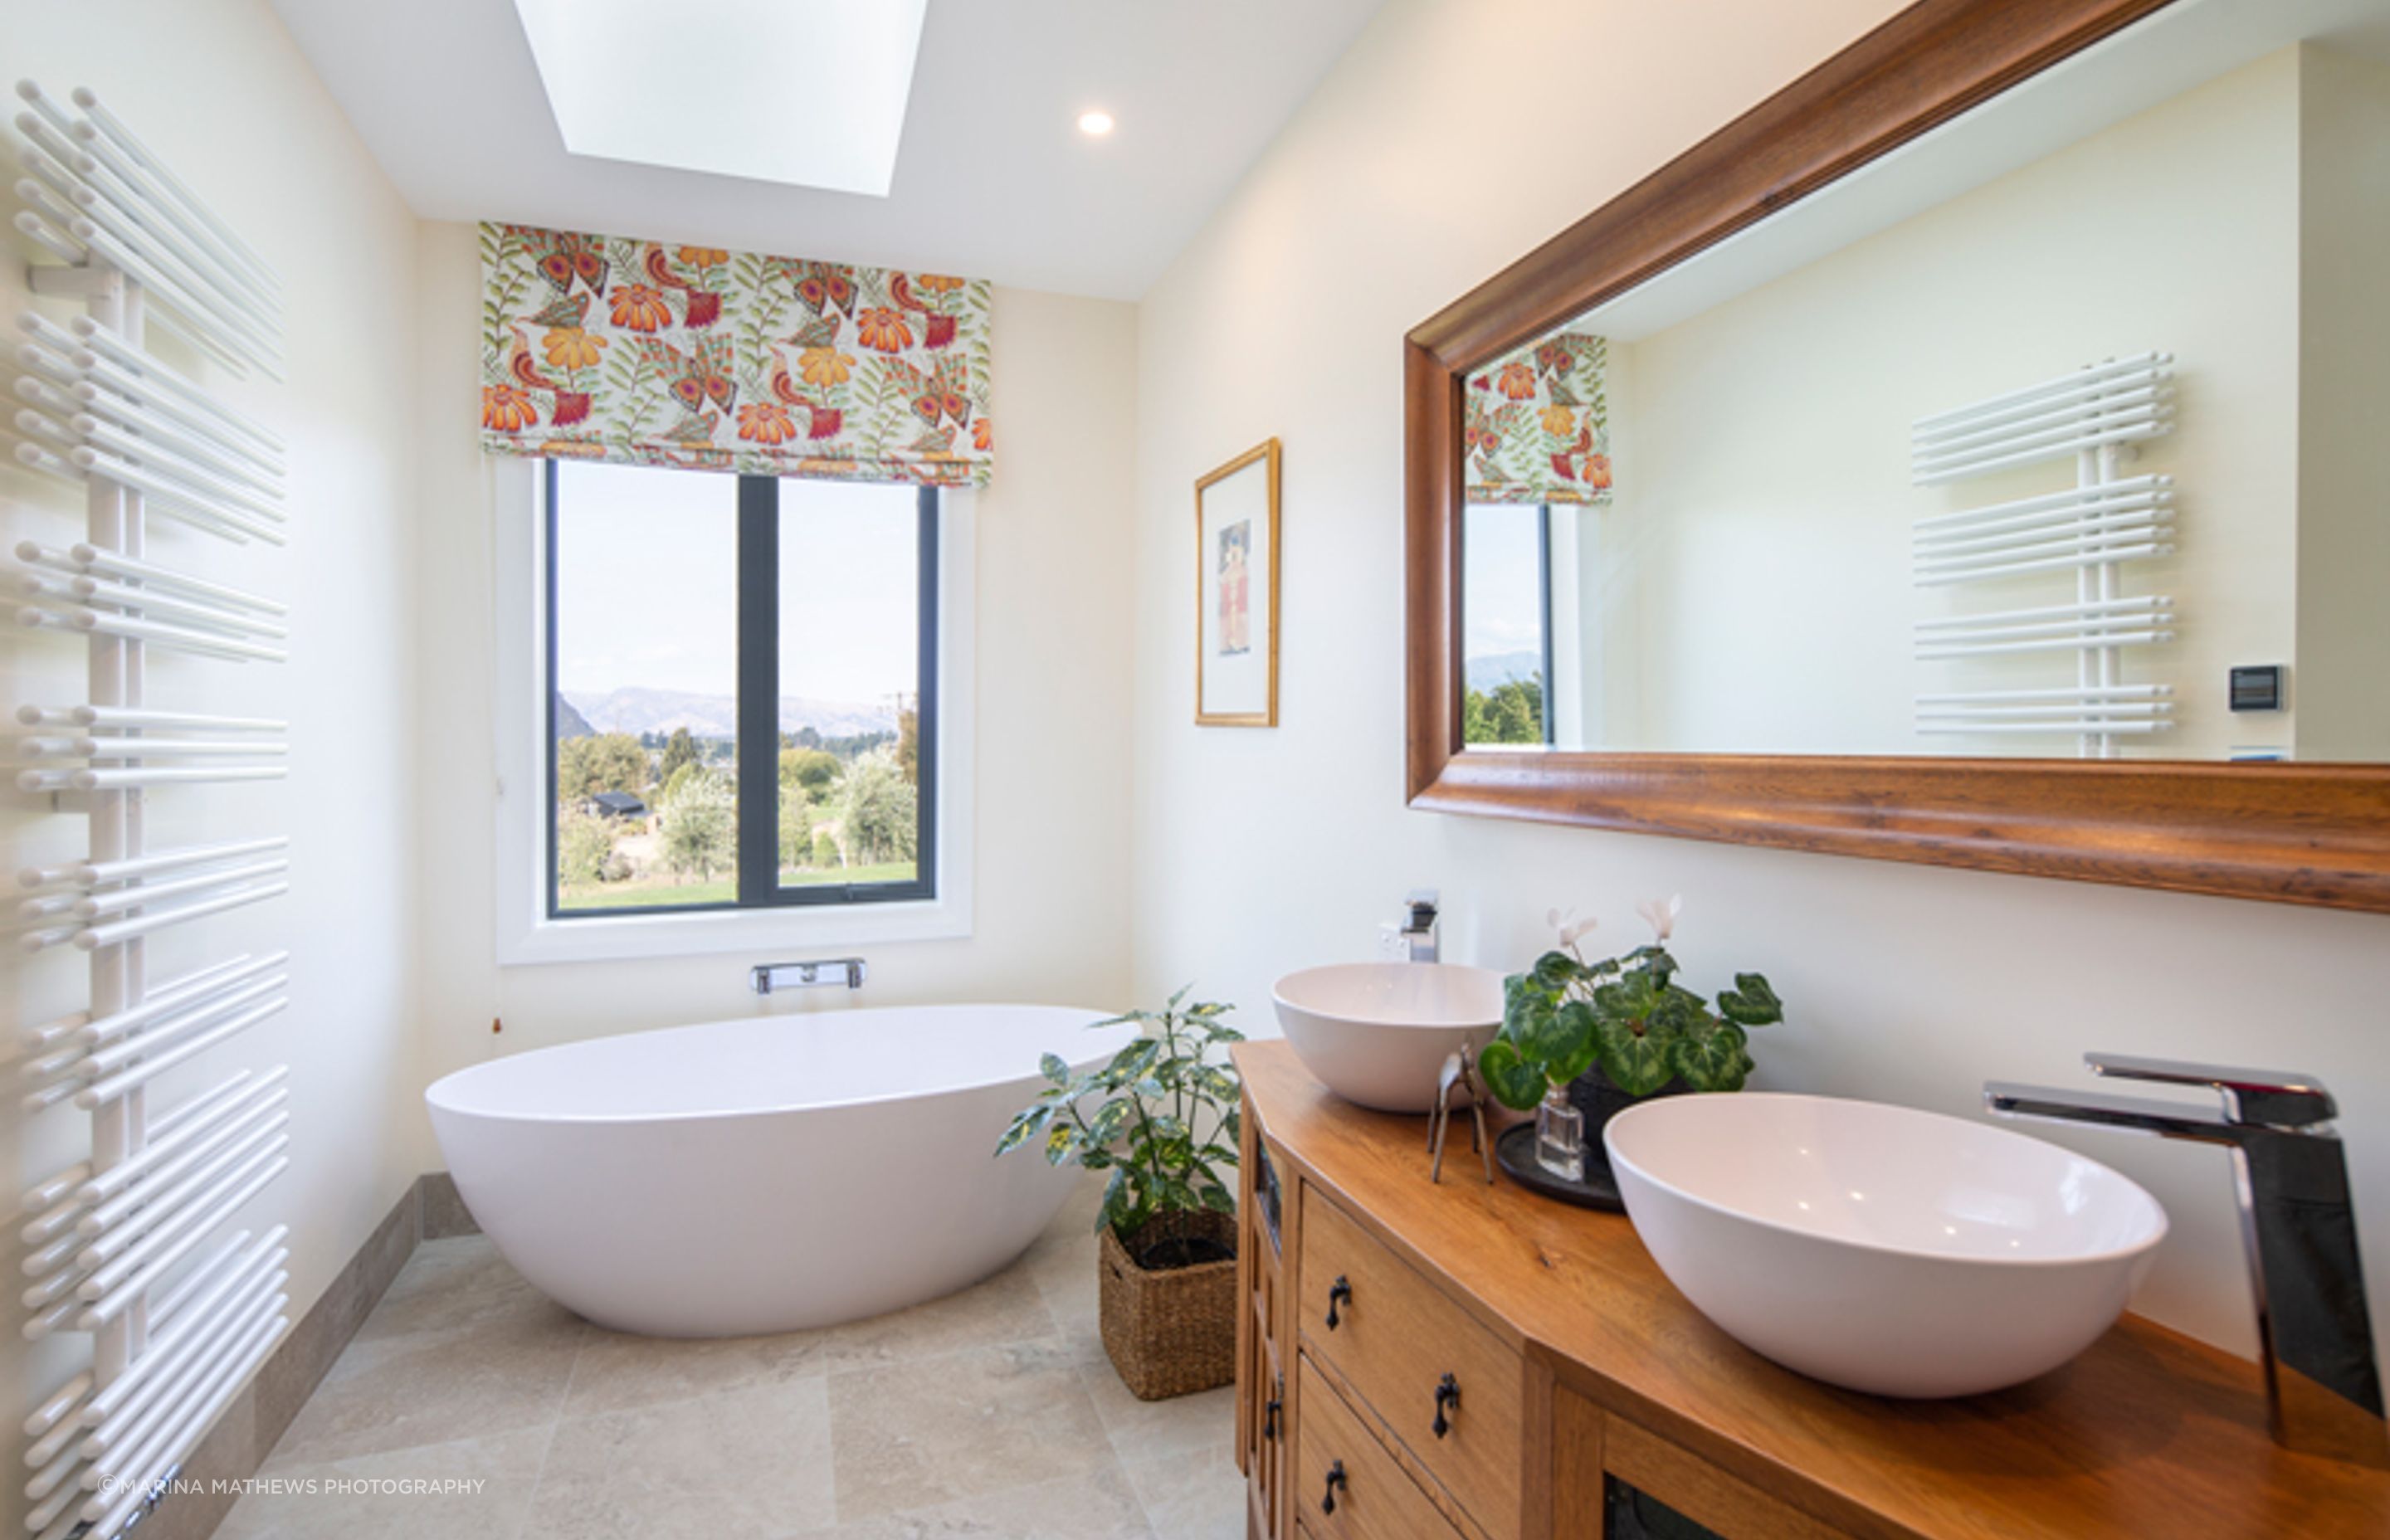 The family bathroom is a light and generous space with views towards the Southern Alps in the distance.